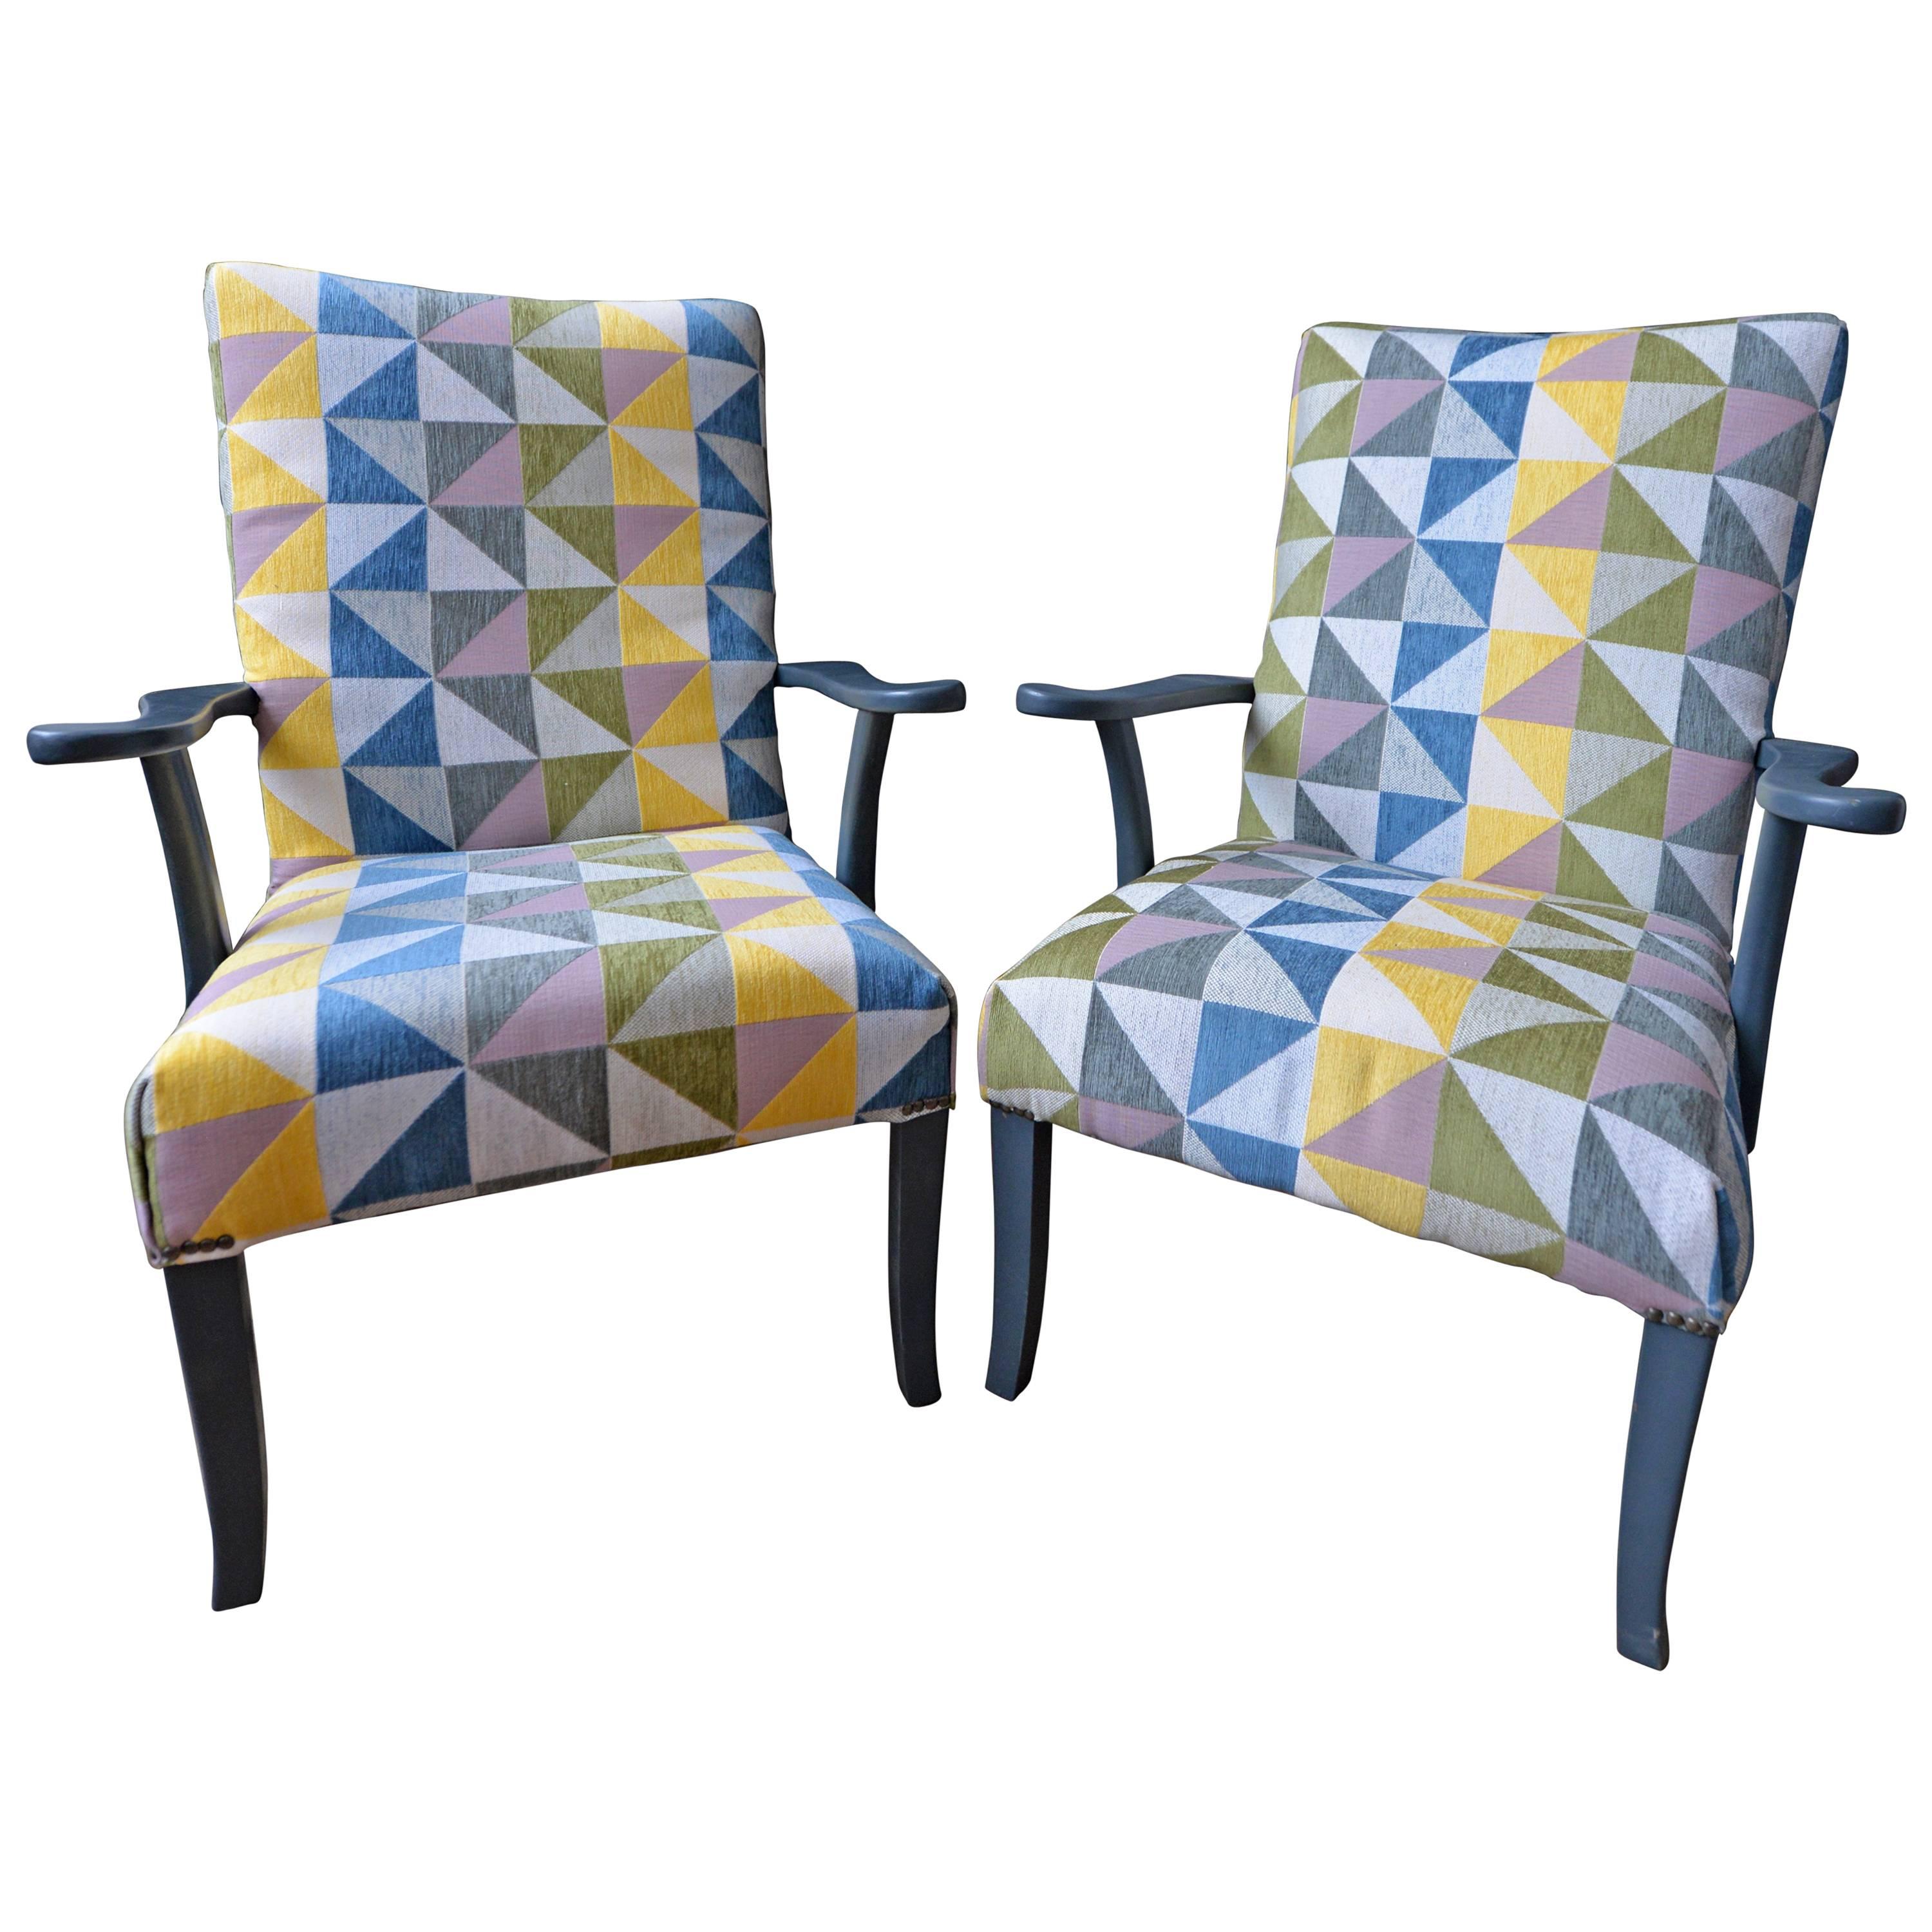 1960s British Reupholstered Lounge Chairs by Parker Knoll